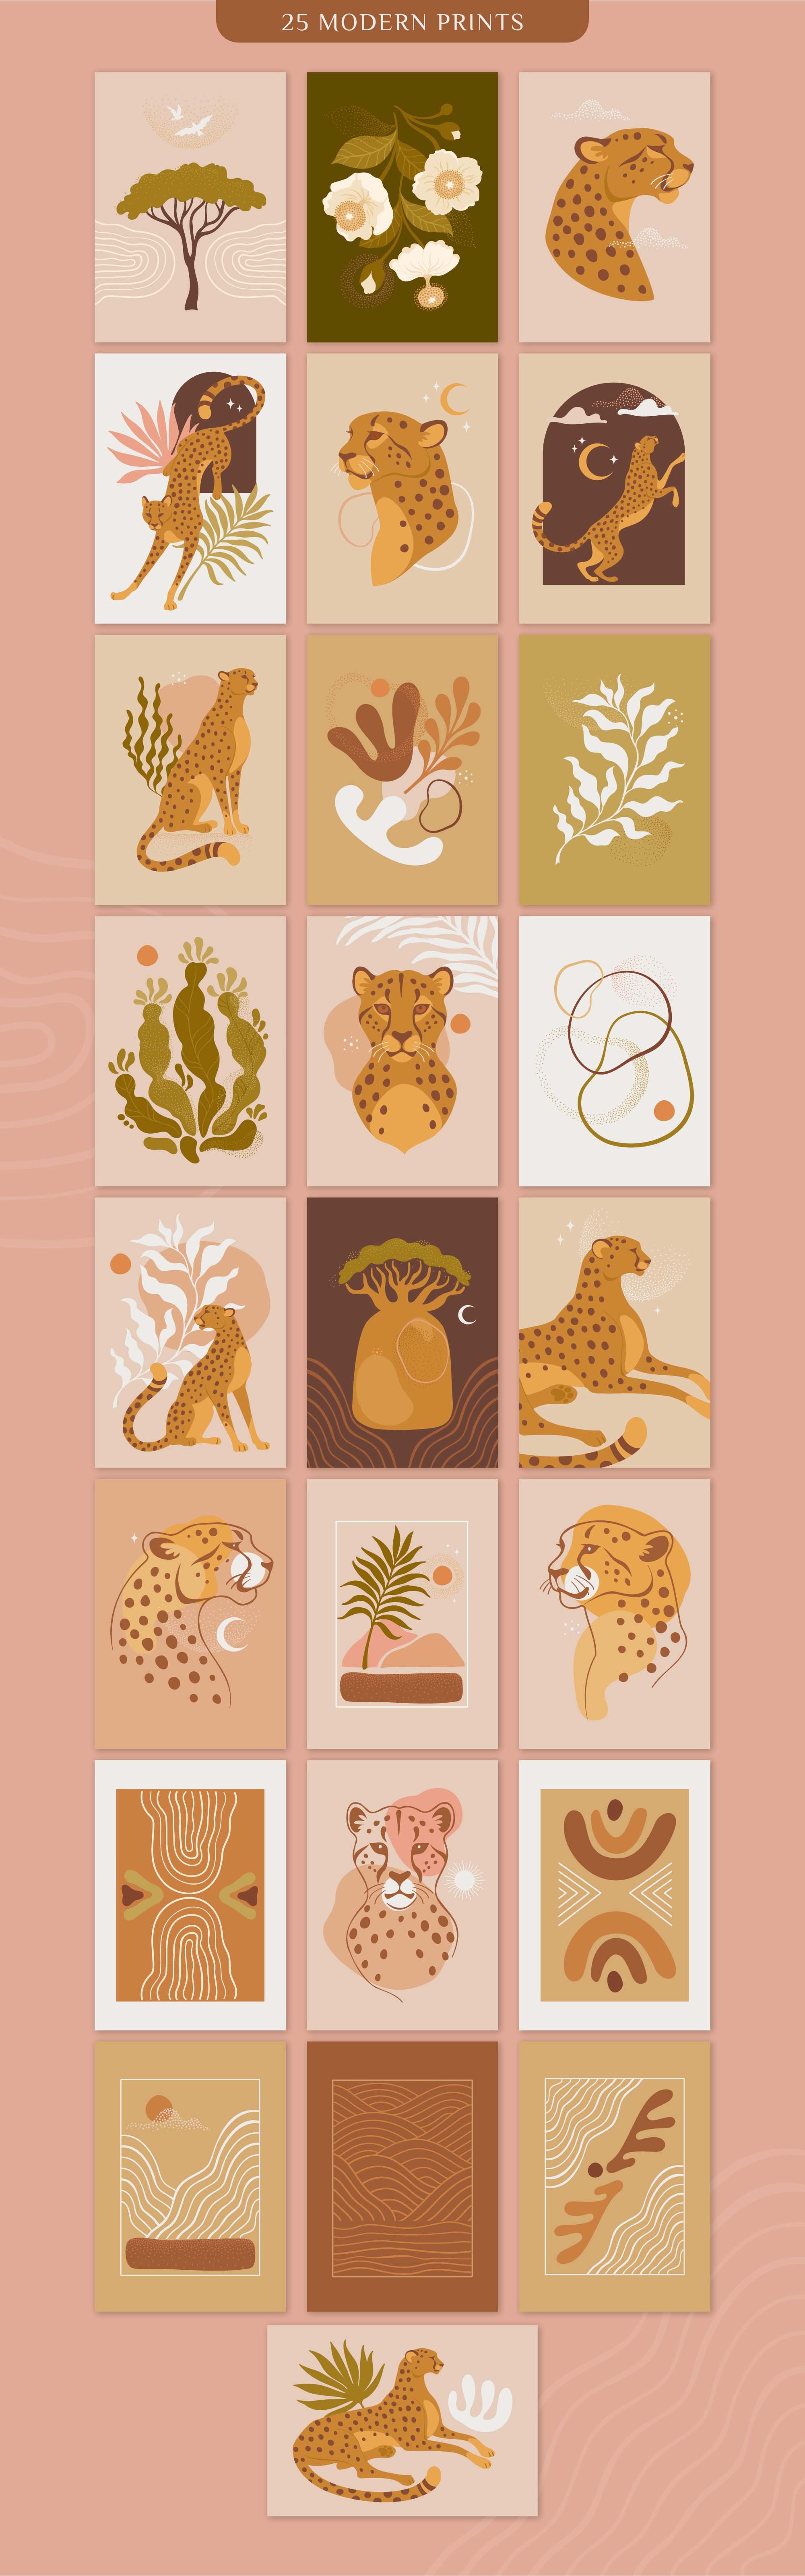 Big pastel collection with different cheetah illustrations.